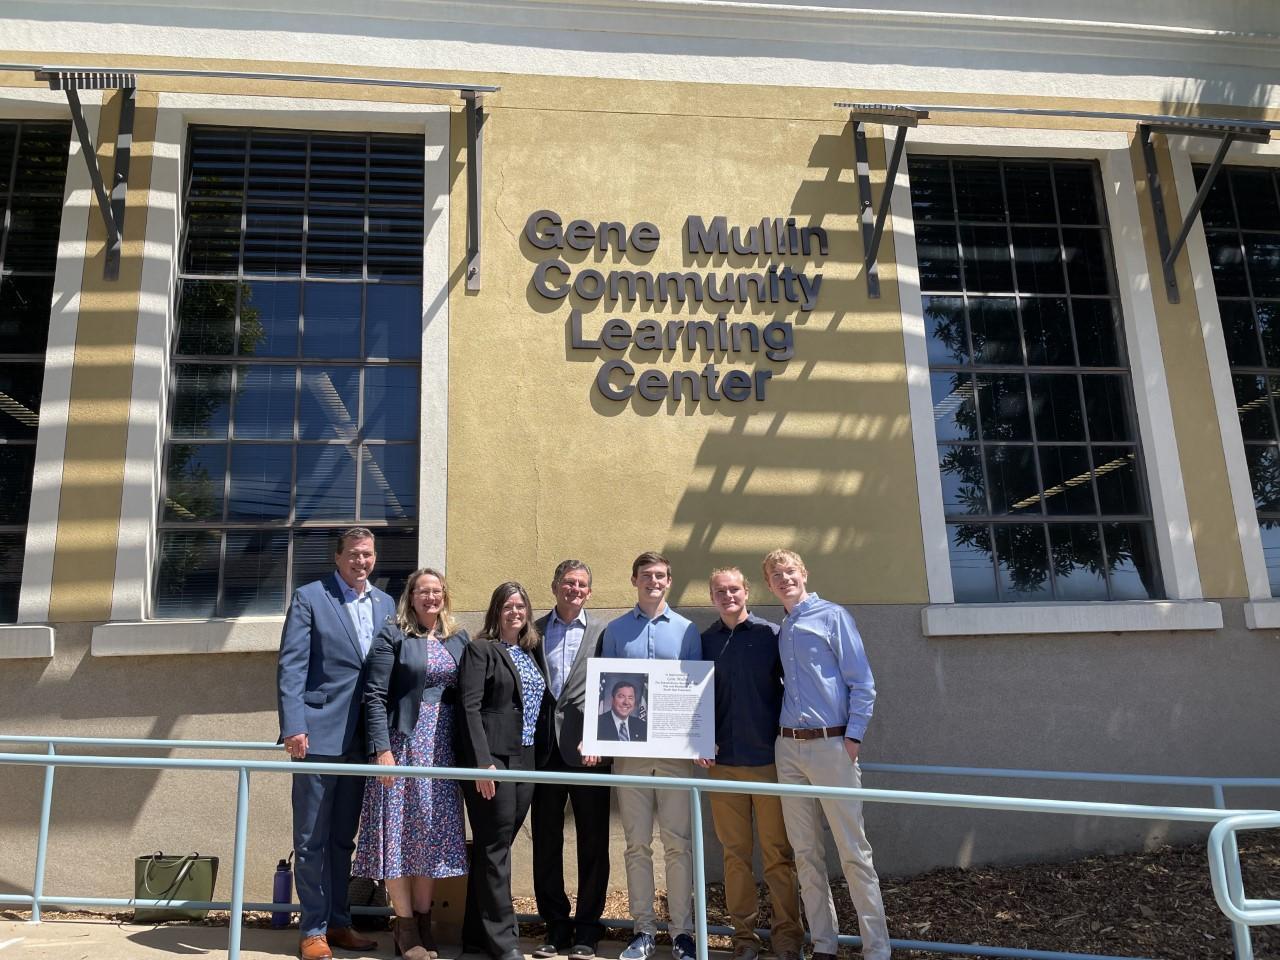 California State Assembly Speaker Pro Tempore Kevin Mullin and family celebrate the rededication of South San Francisco"s Community Learning Center after his father, former Assembly Member and South City High teacher Gene Mullin. 